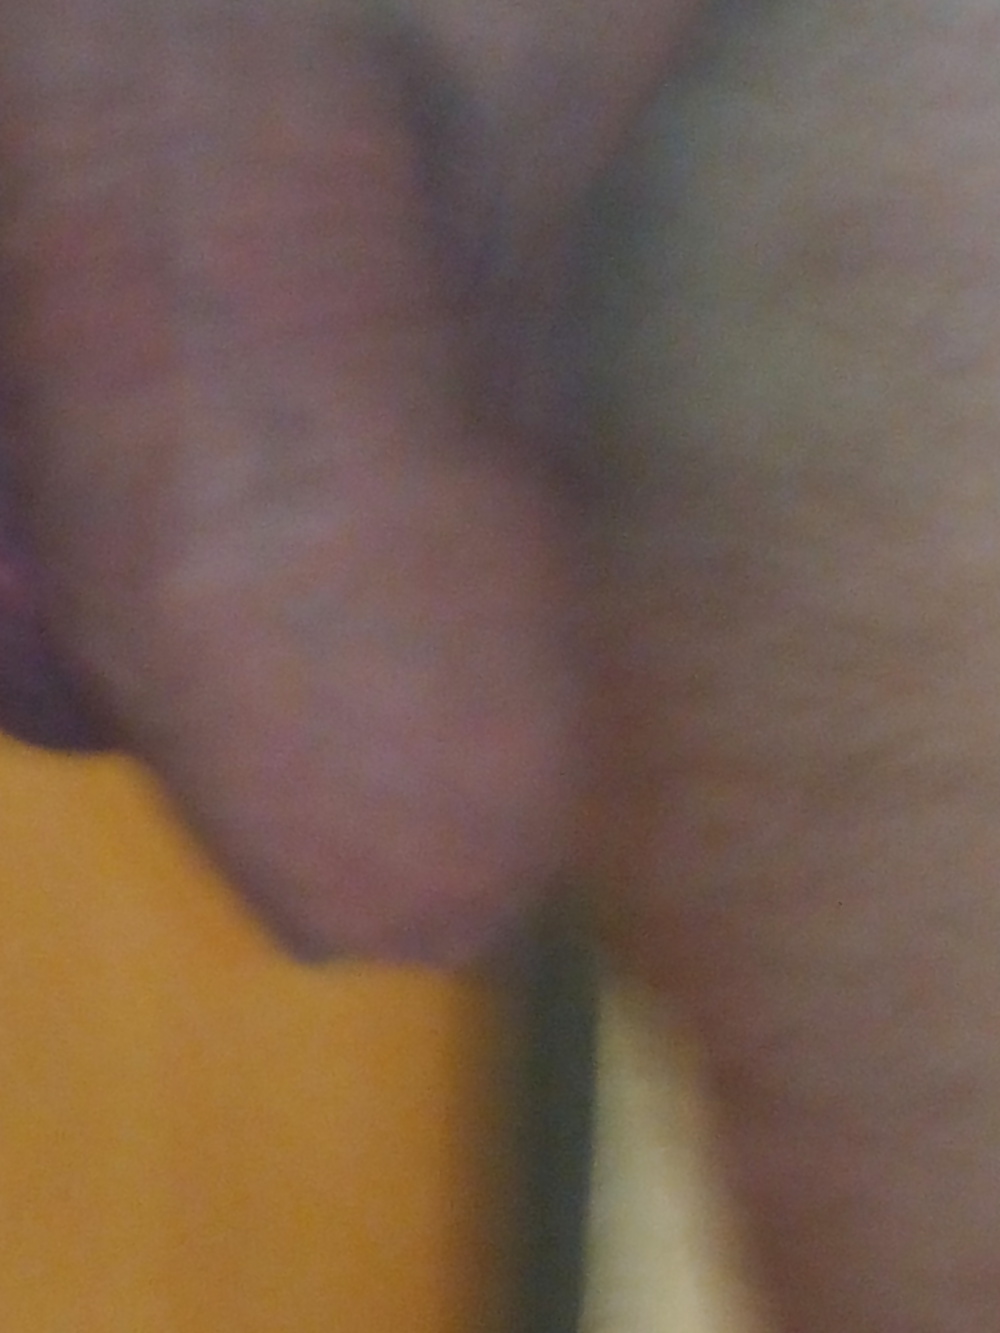 My small cock #30968037